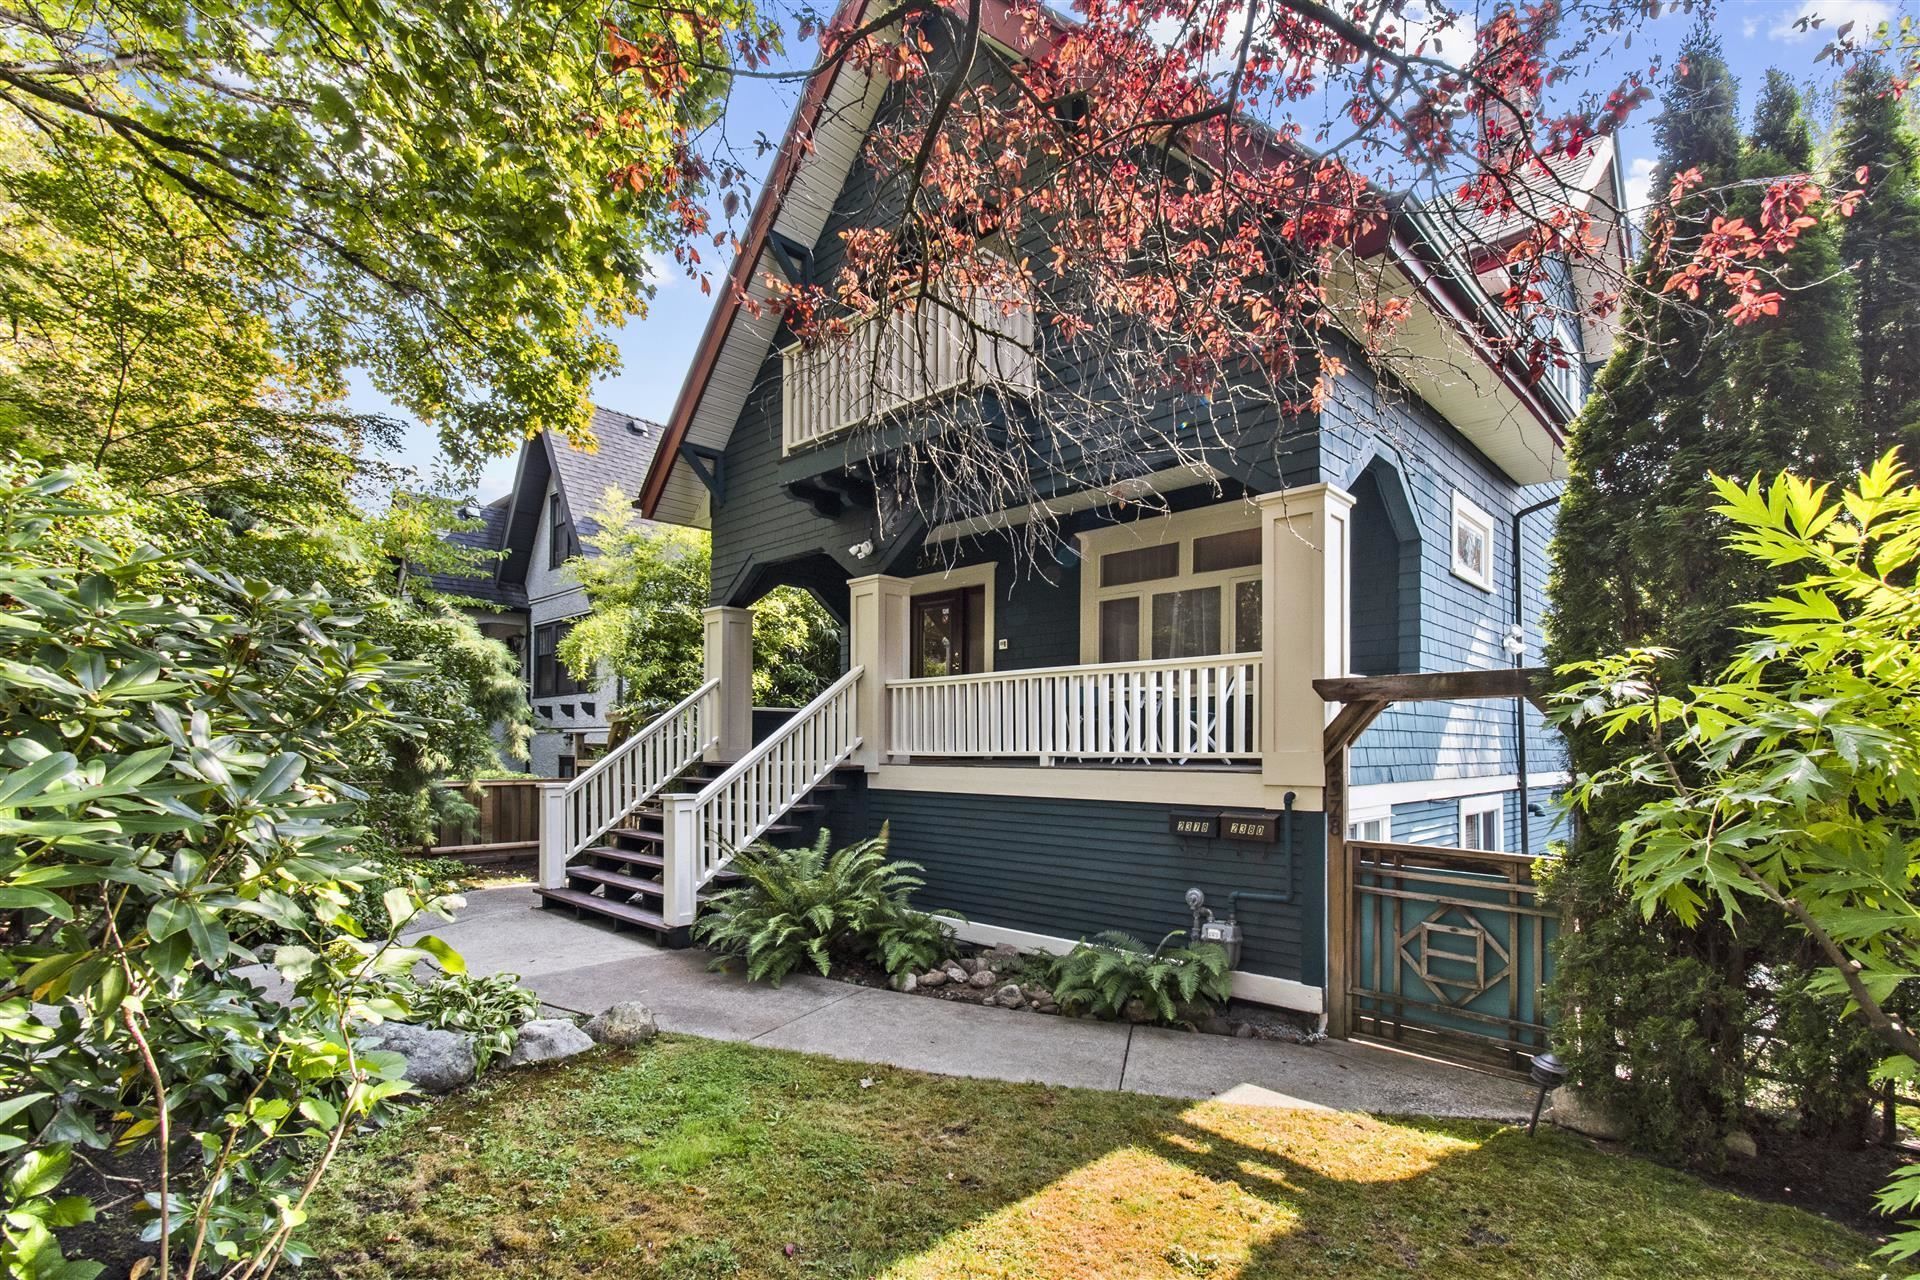 Walking distance to Broadway and Fourth shops and restaurants, 5th Avenue Cinemas, transit, parks and beaches.  Short commute to UBC, downtown, VGH, etc. Close to great west side schools including St John's, Fraser Academy, and St Augustine.